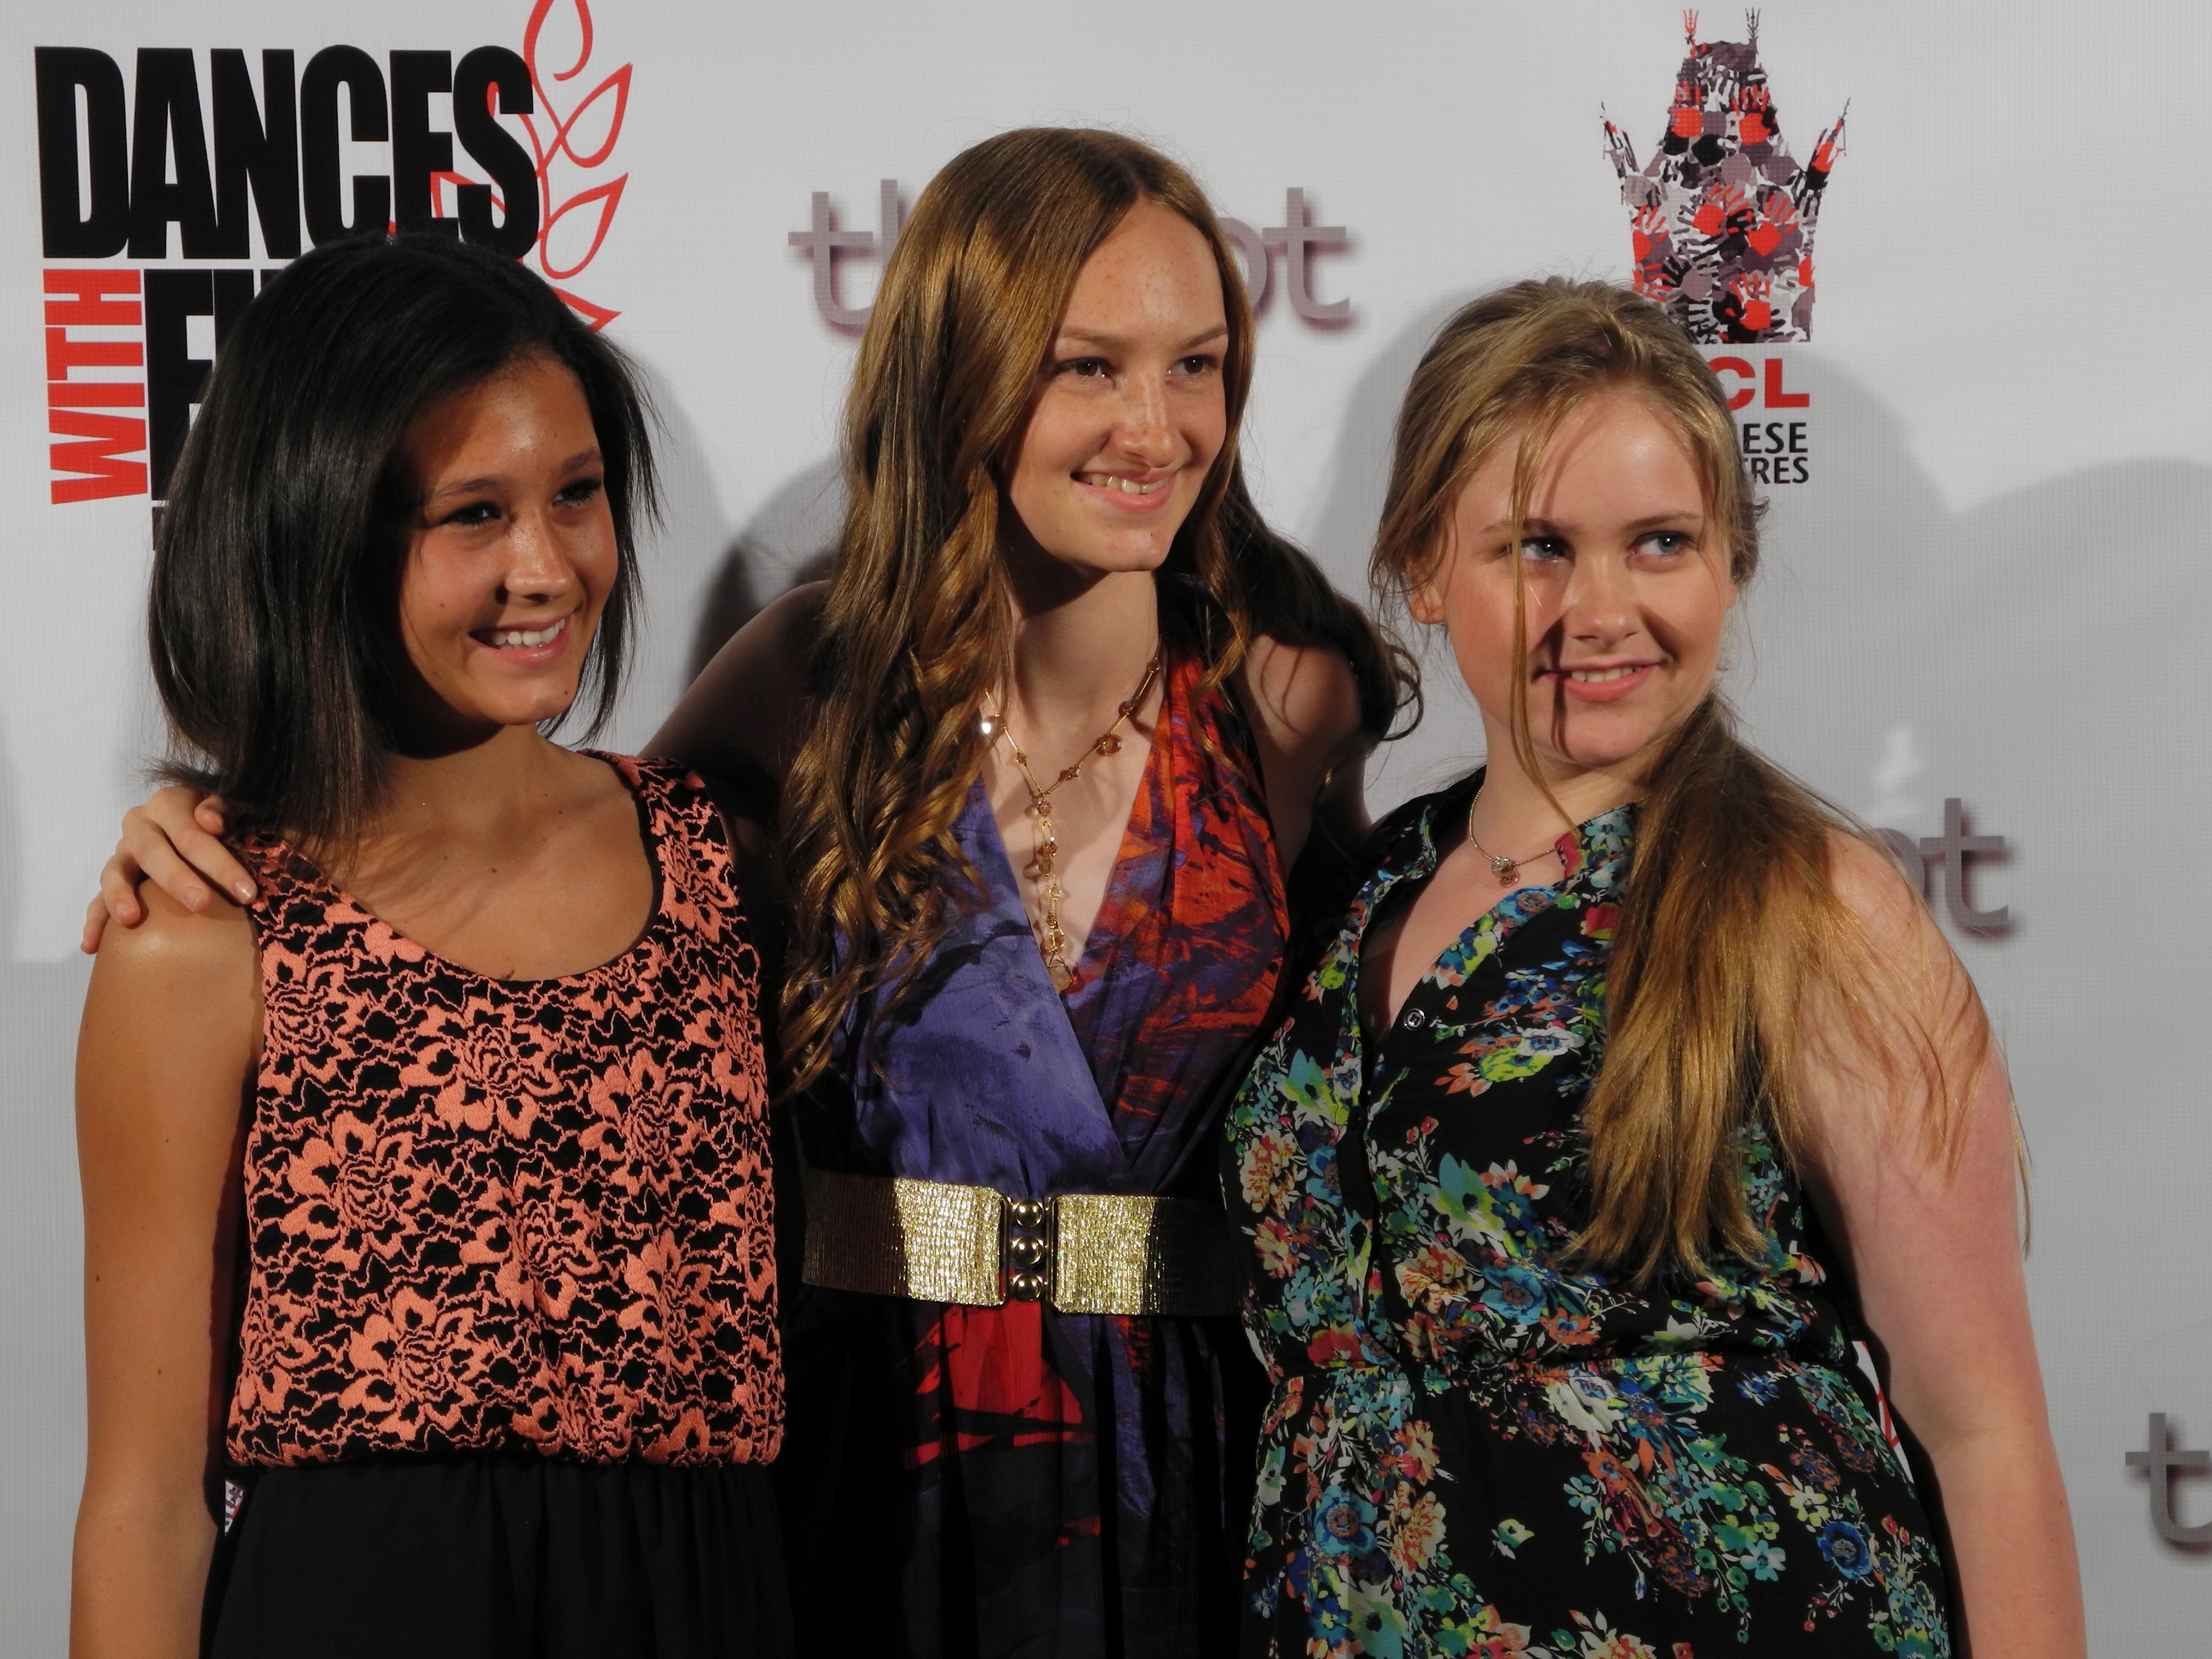 At the 2013 Dances With Films film festival